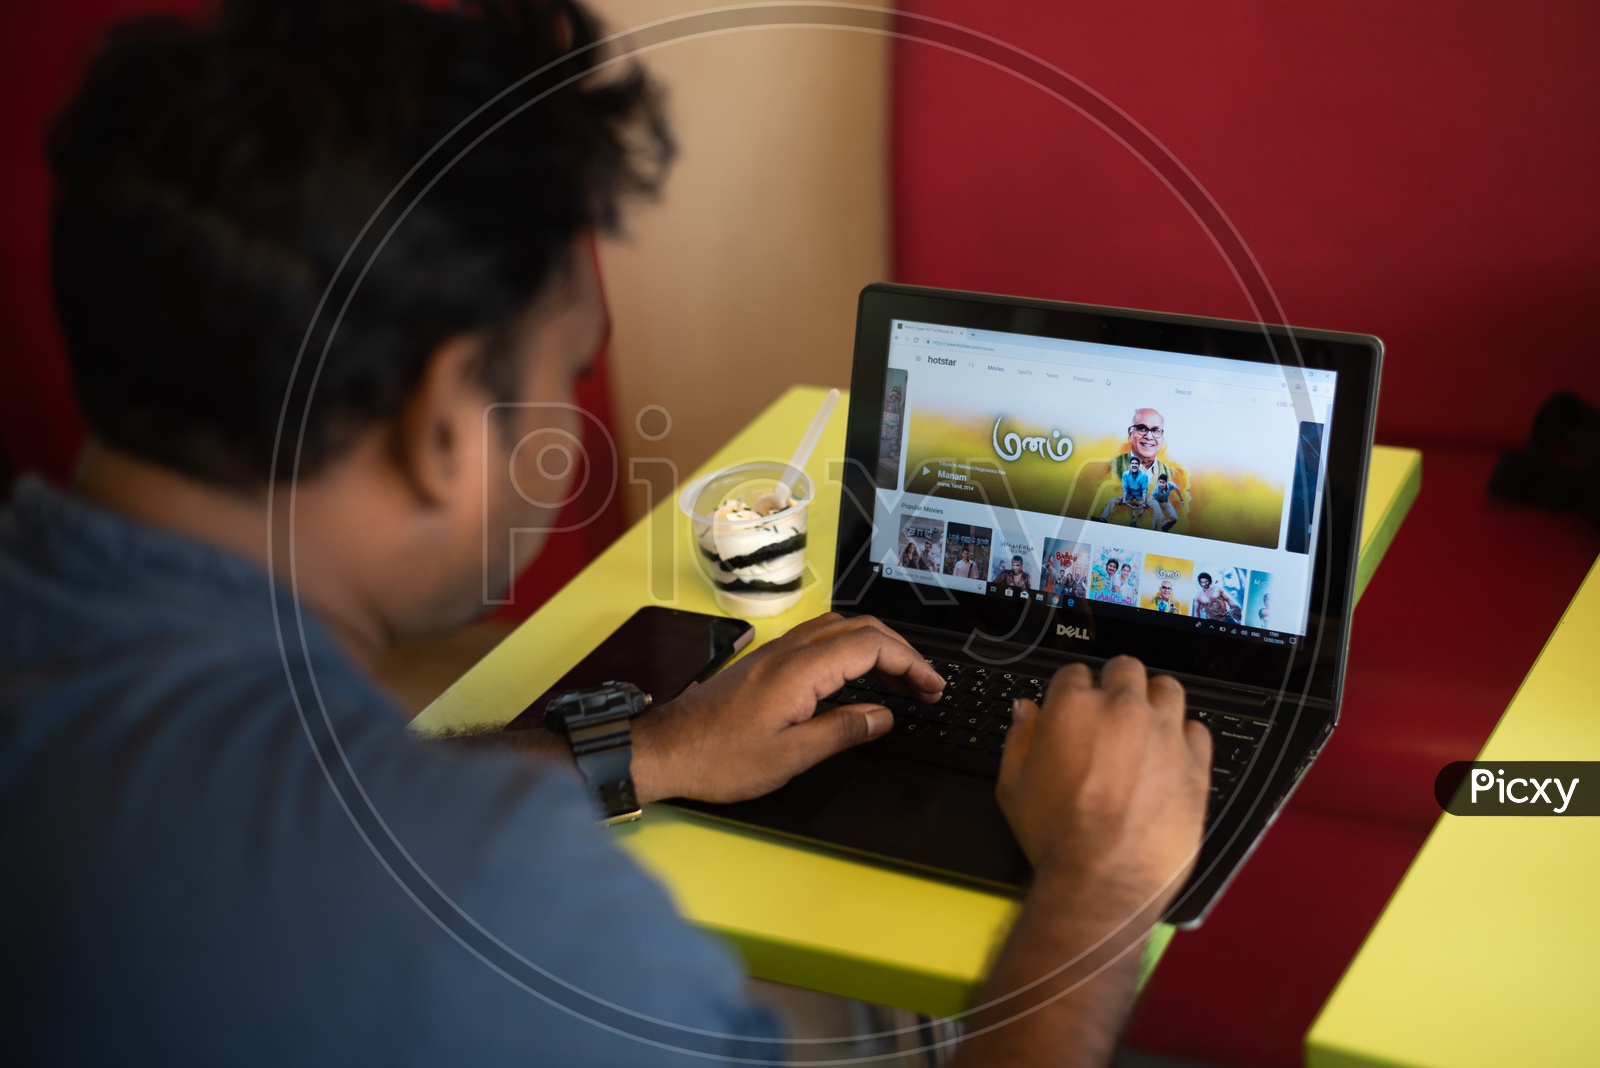 Indian Youth searching Movies on Hotstar in Laptop